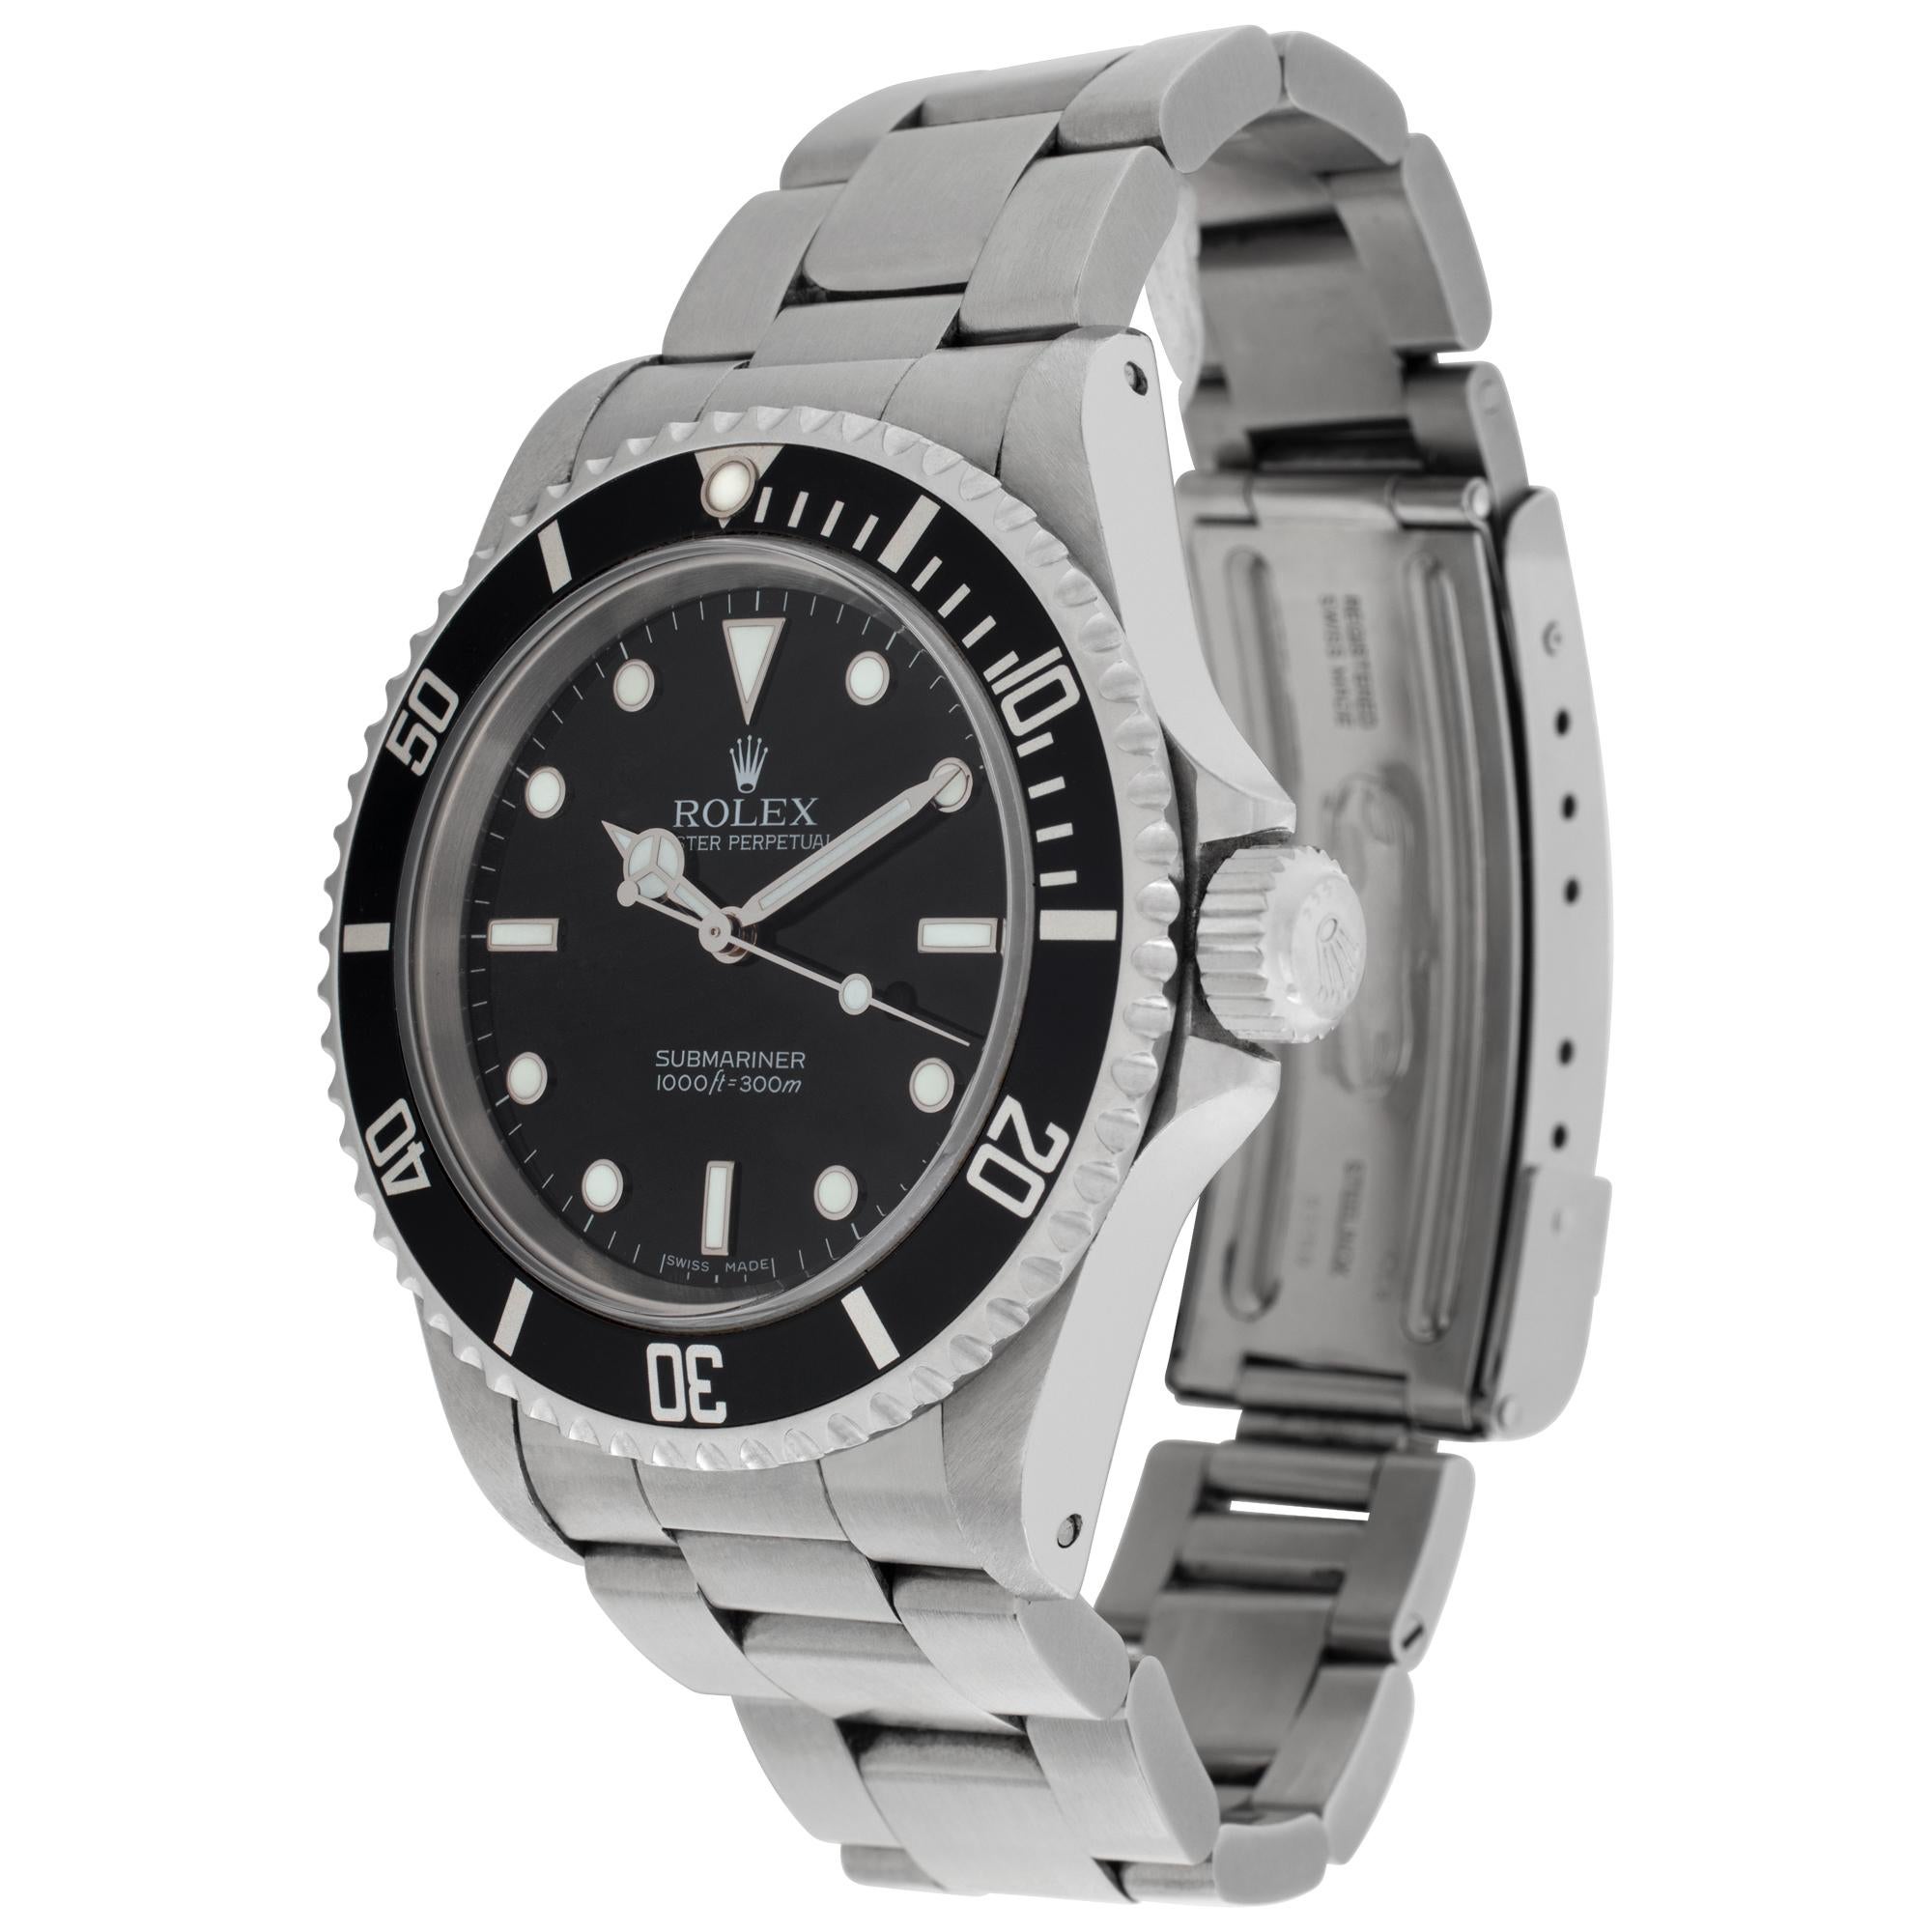 Rolex Submariner No Date in stainless steel. Auto w/ sweep seconds. 40 mm case size. Circa 2006.  **Bank wire only at this price** Ref 14060M. Fine Pre-owned Rolex Watch. Certified preowned Sport Rolex Submariner No Date 14060M watch is made out of